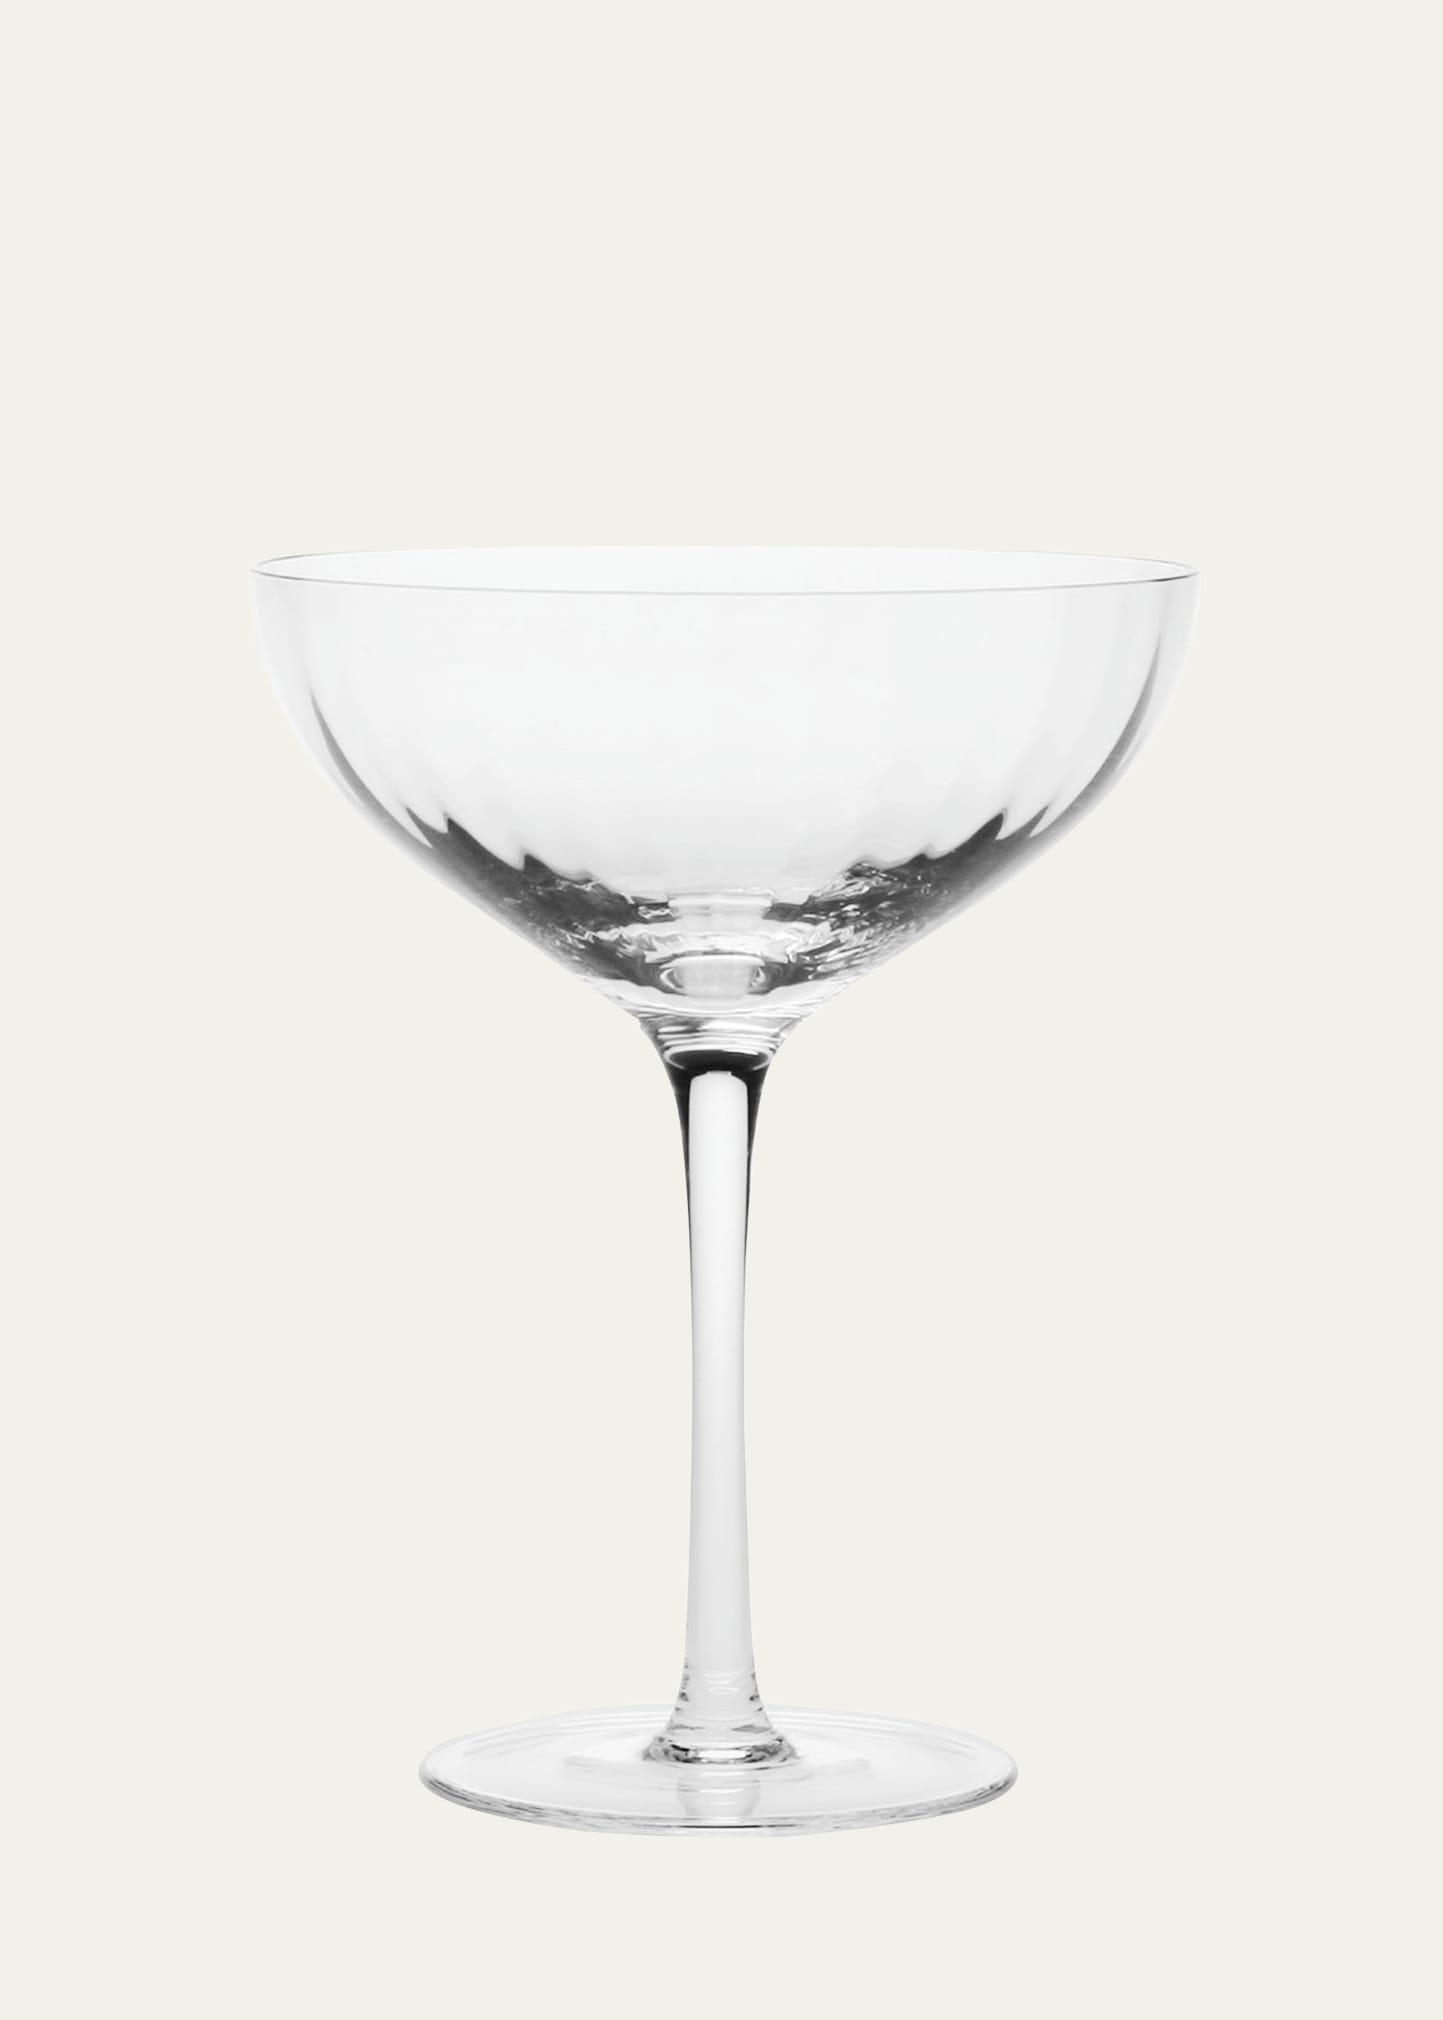 Corinne Cocktail/Coupe Glass